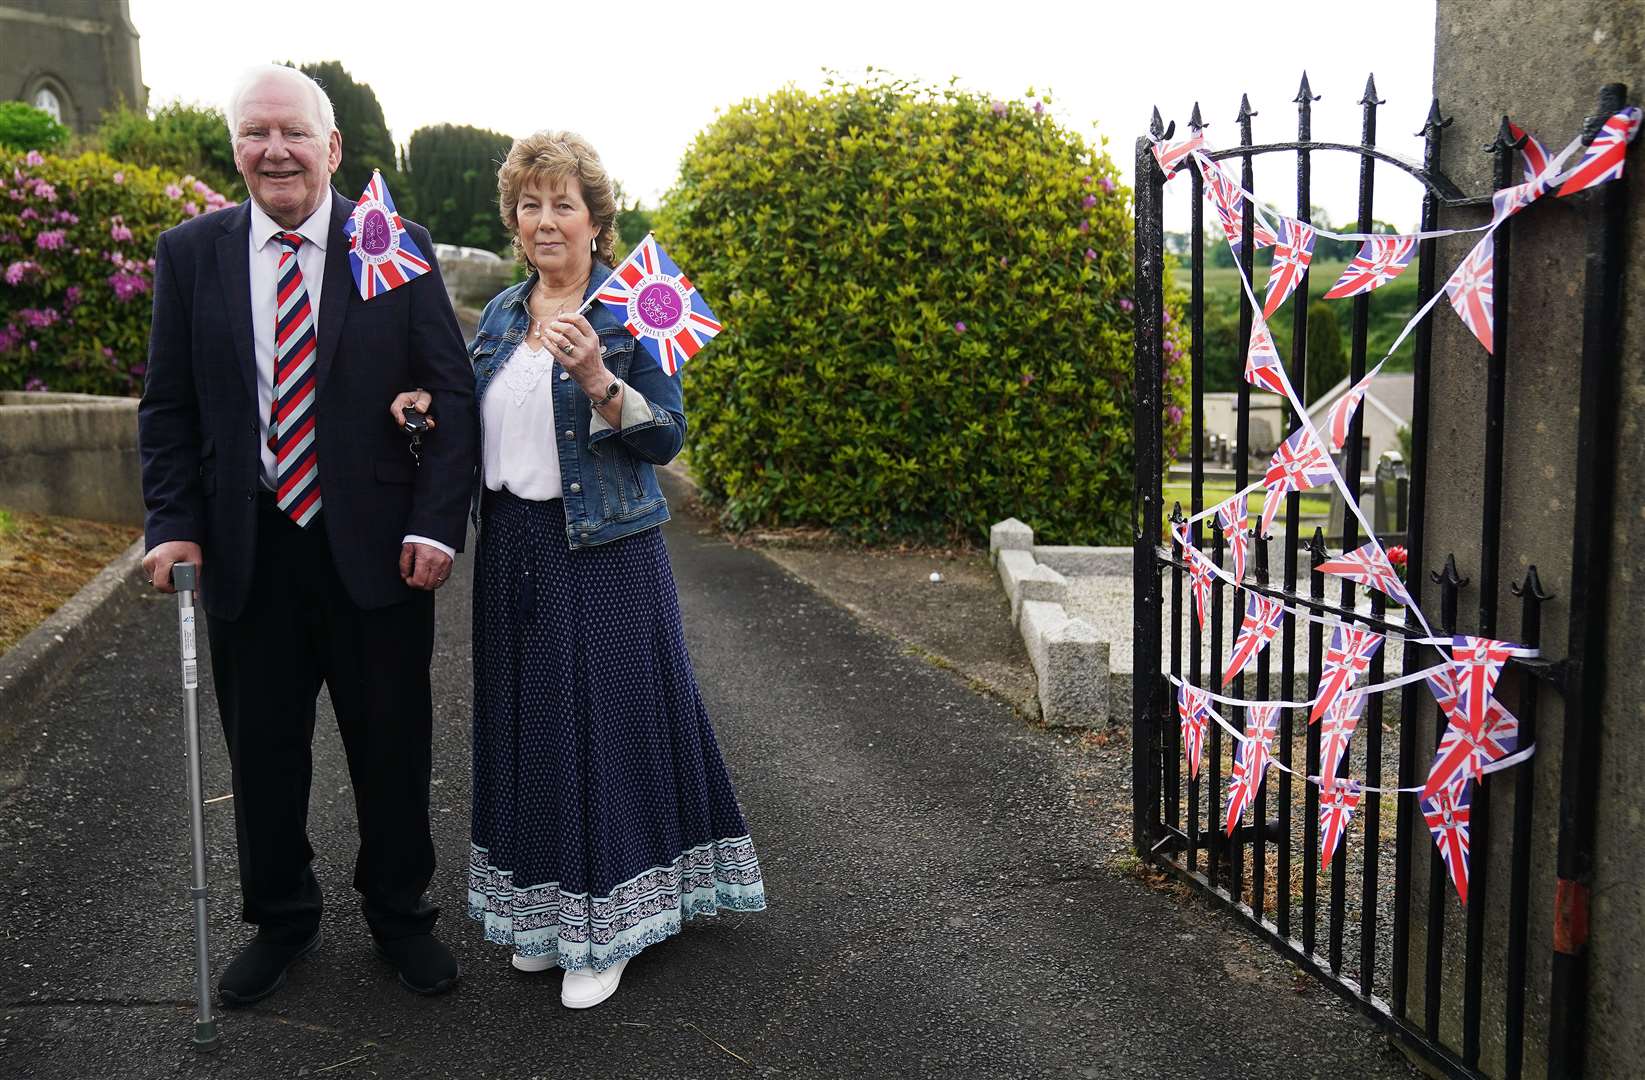 George McGaffin and his wife Lorna attend a picnic at St Bartholomew’s Parish Church, Newry, as part of the Big Jubilee Lunch (Brian Lawless/PA)